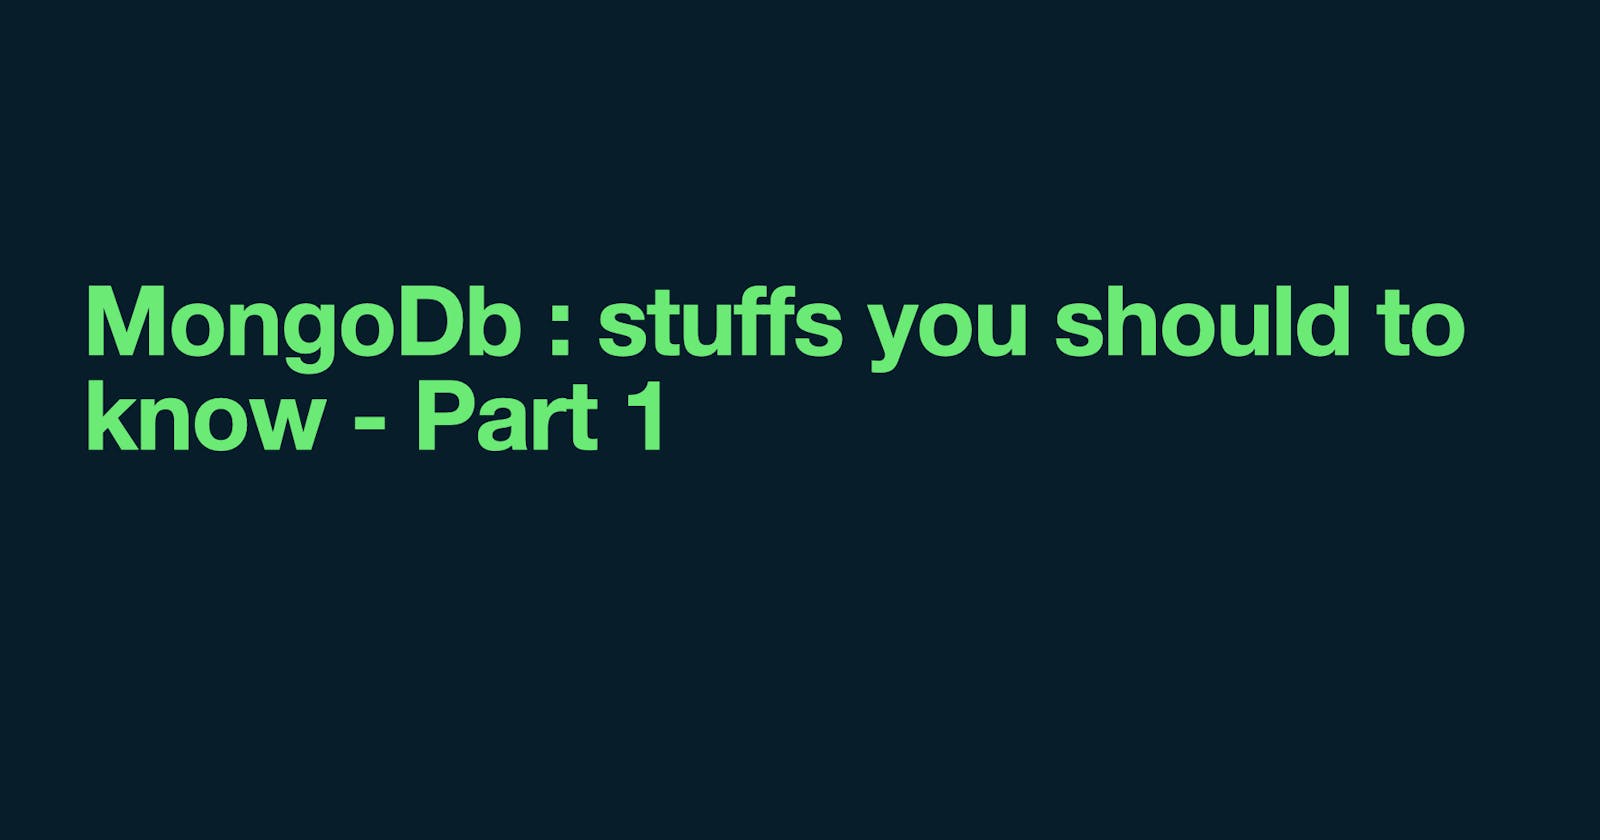 MongoDb : stuffs you should to know - Part 1